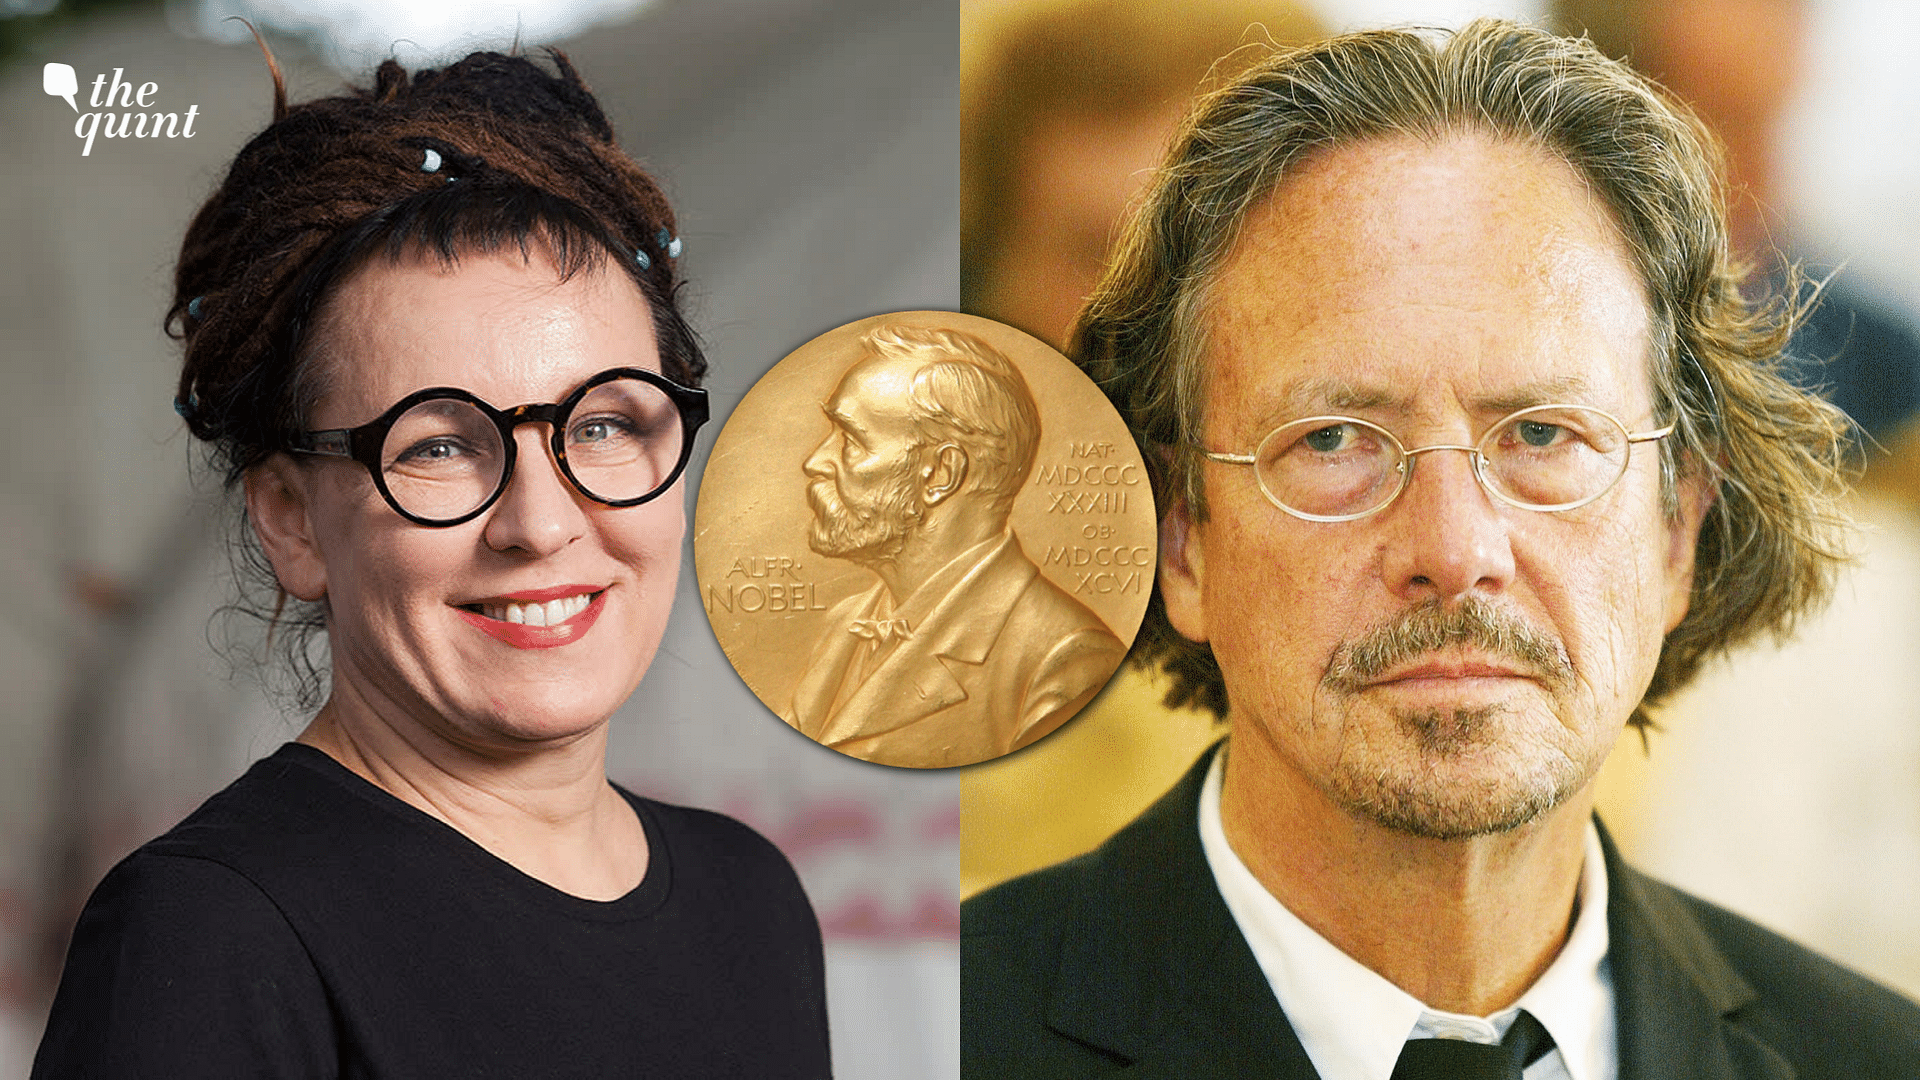 All you need to know about Nobel Laureates Olga Tokarczuk and Peter Handke.